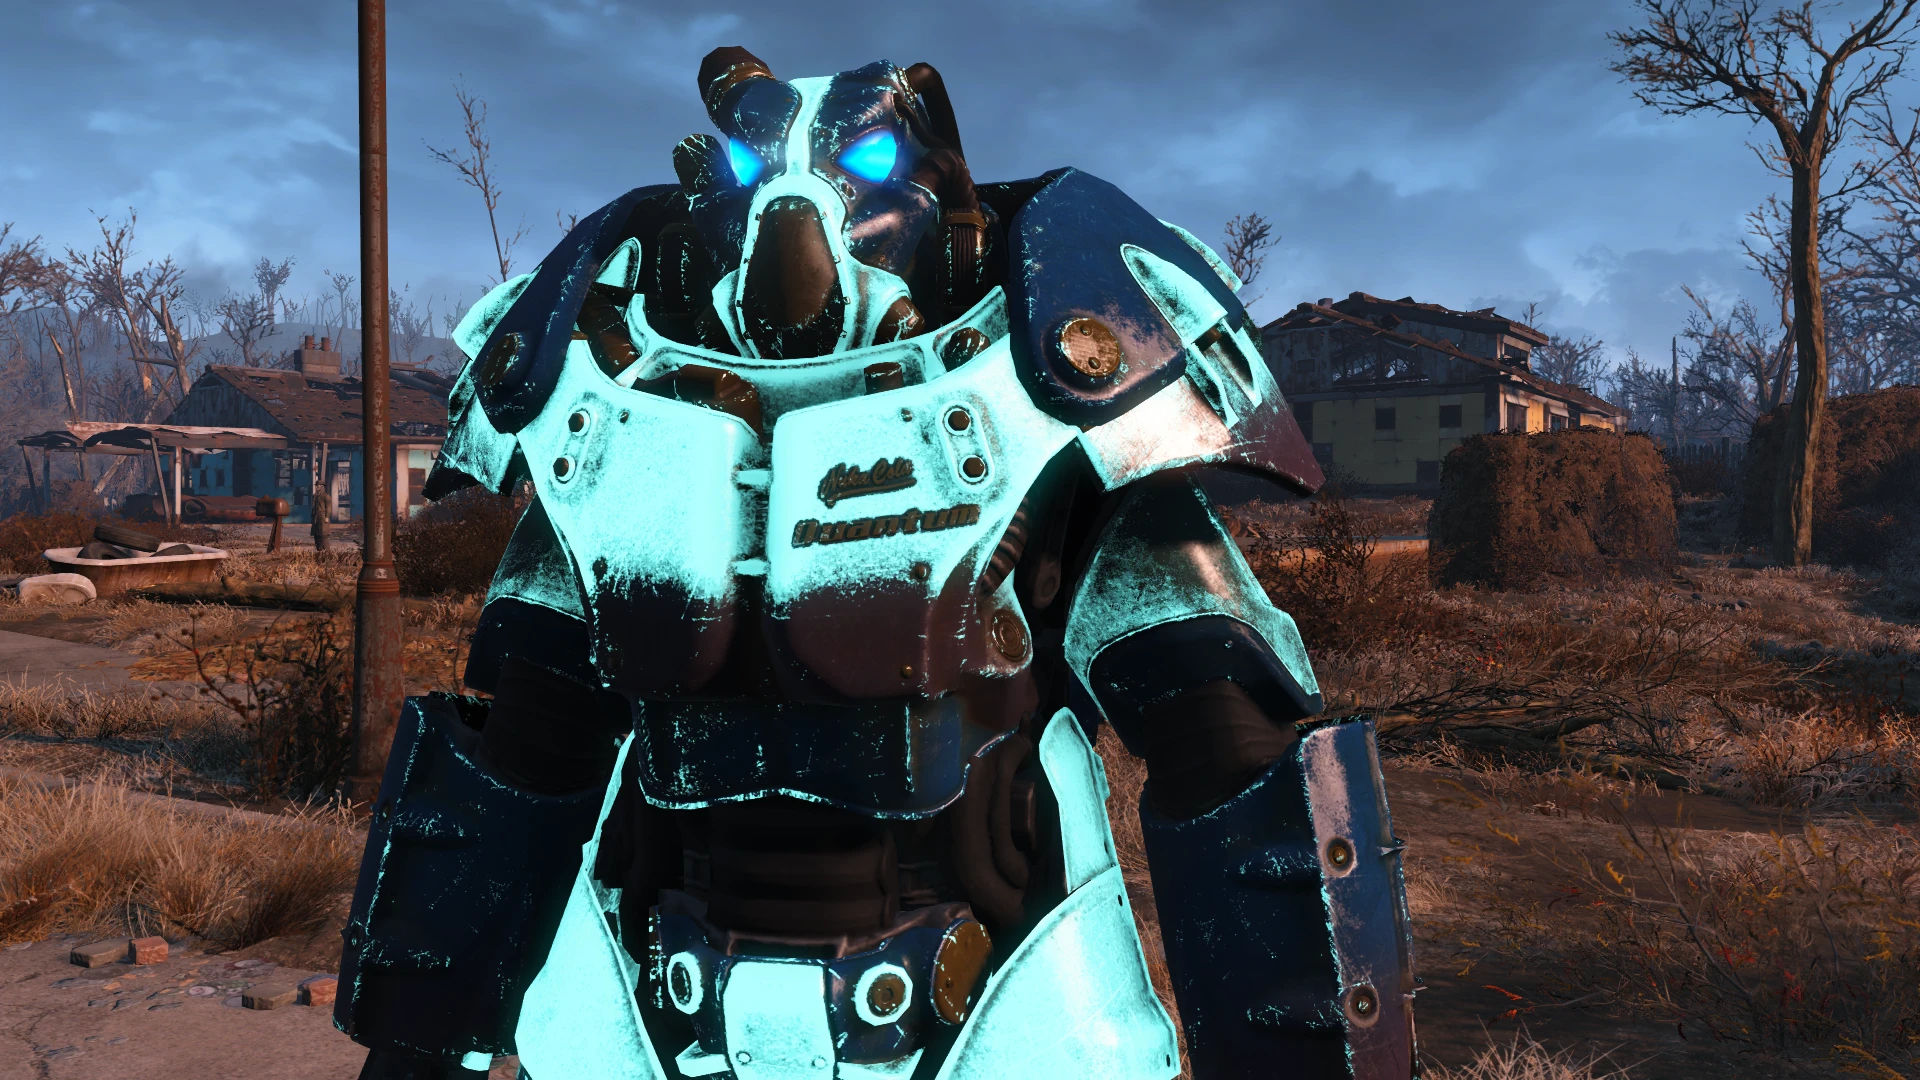 Glowing Nuka Cola Quantum X01 Power Armor at Fallout 4 